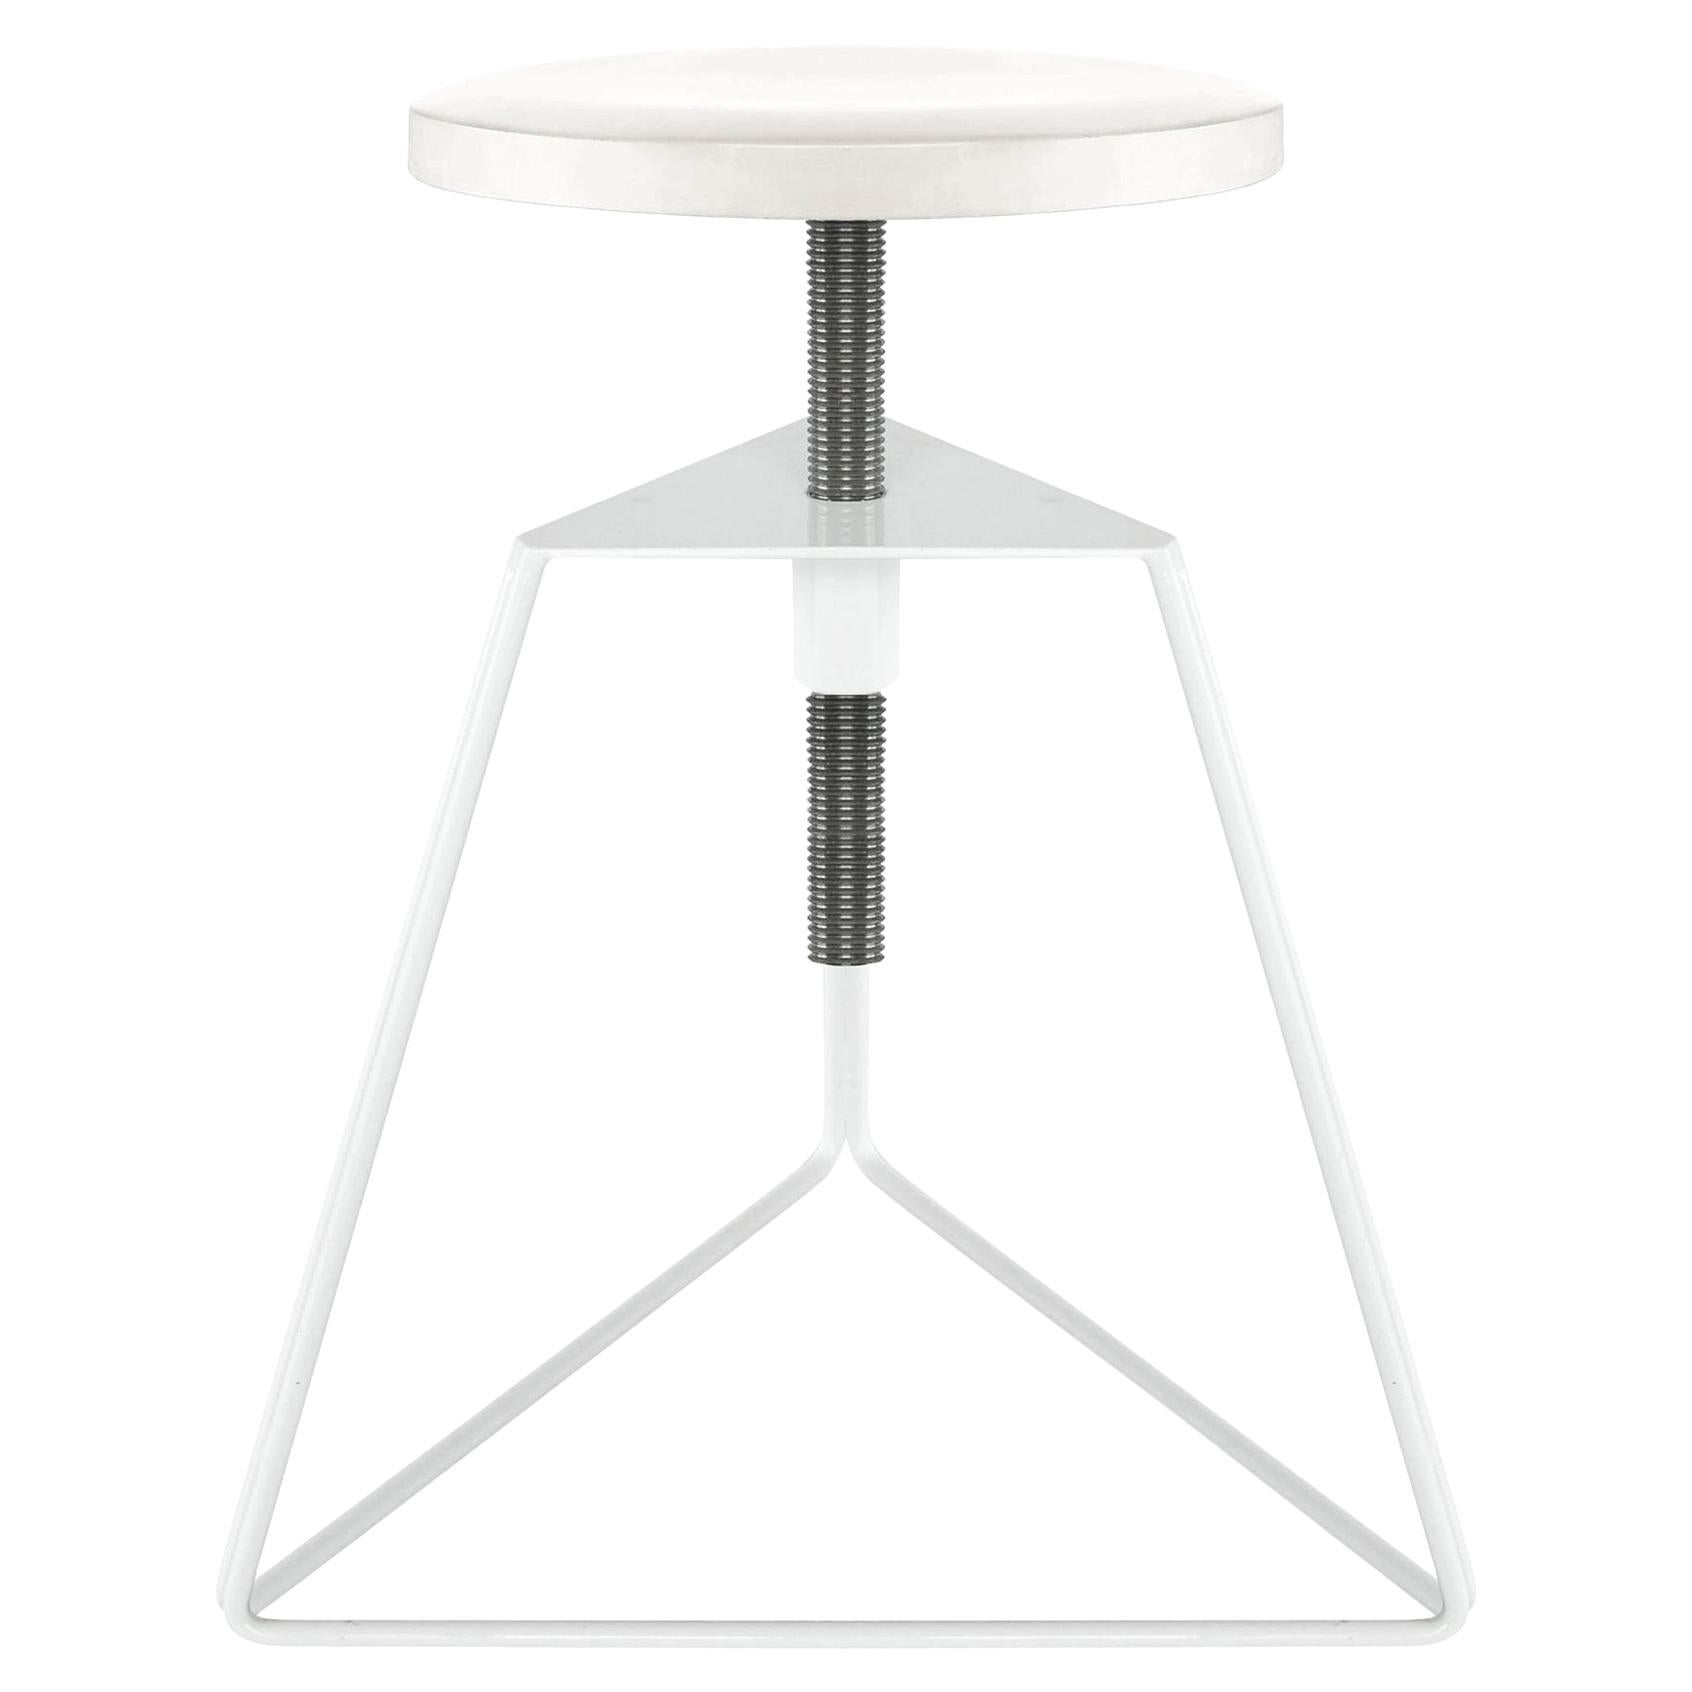 Adjustable Height Camp Stool, White Marble Seat and White Base, Made in the USA For Sale